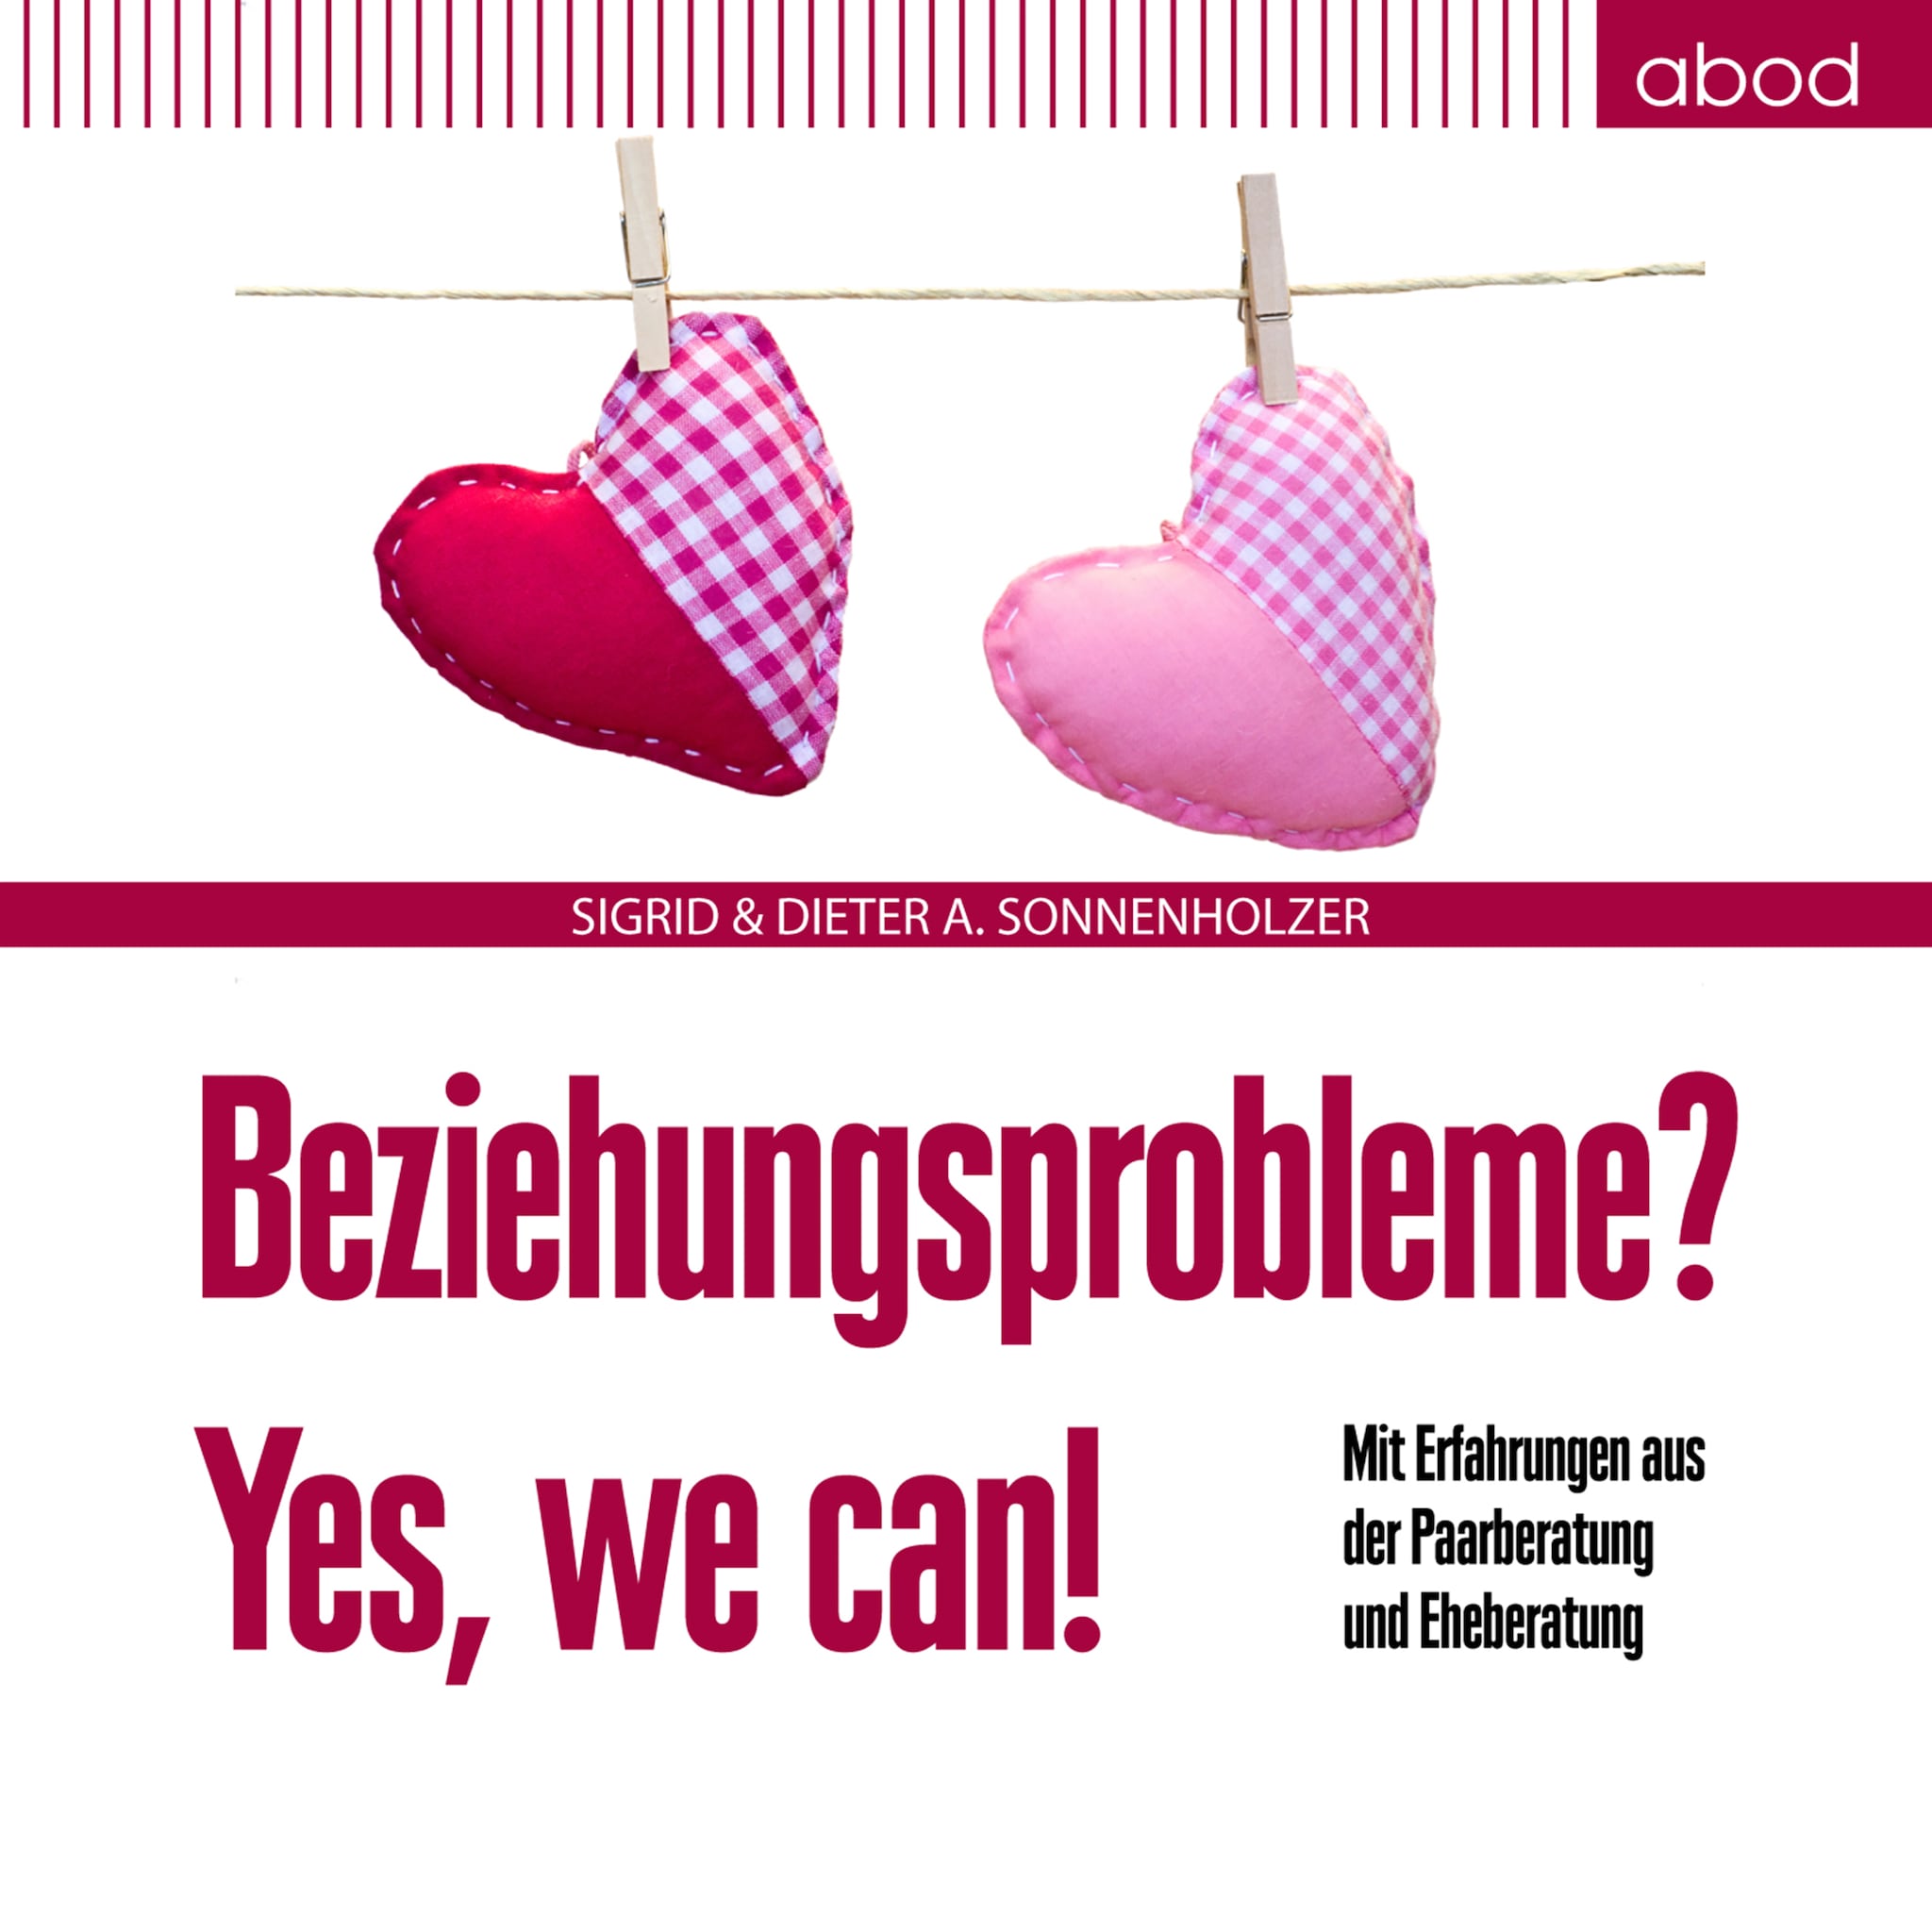 Beziehungsprobleme? Yes, we can! ilmaiseksi